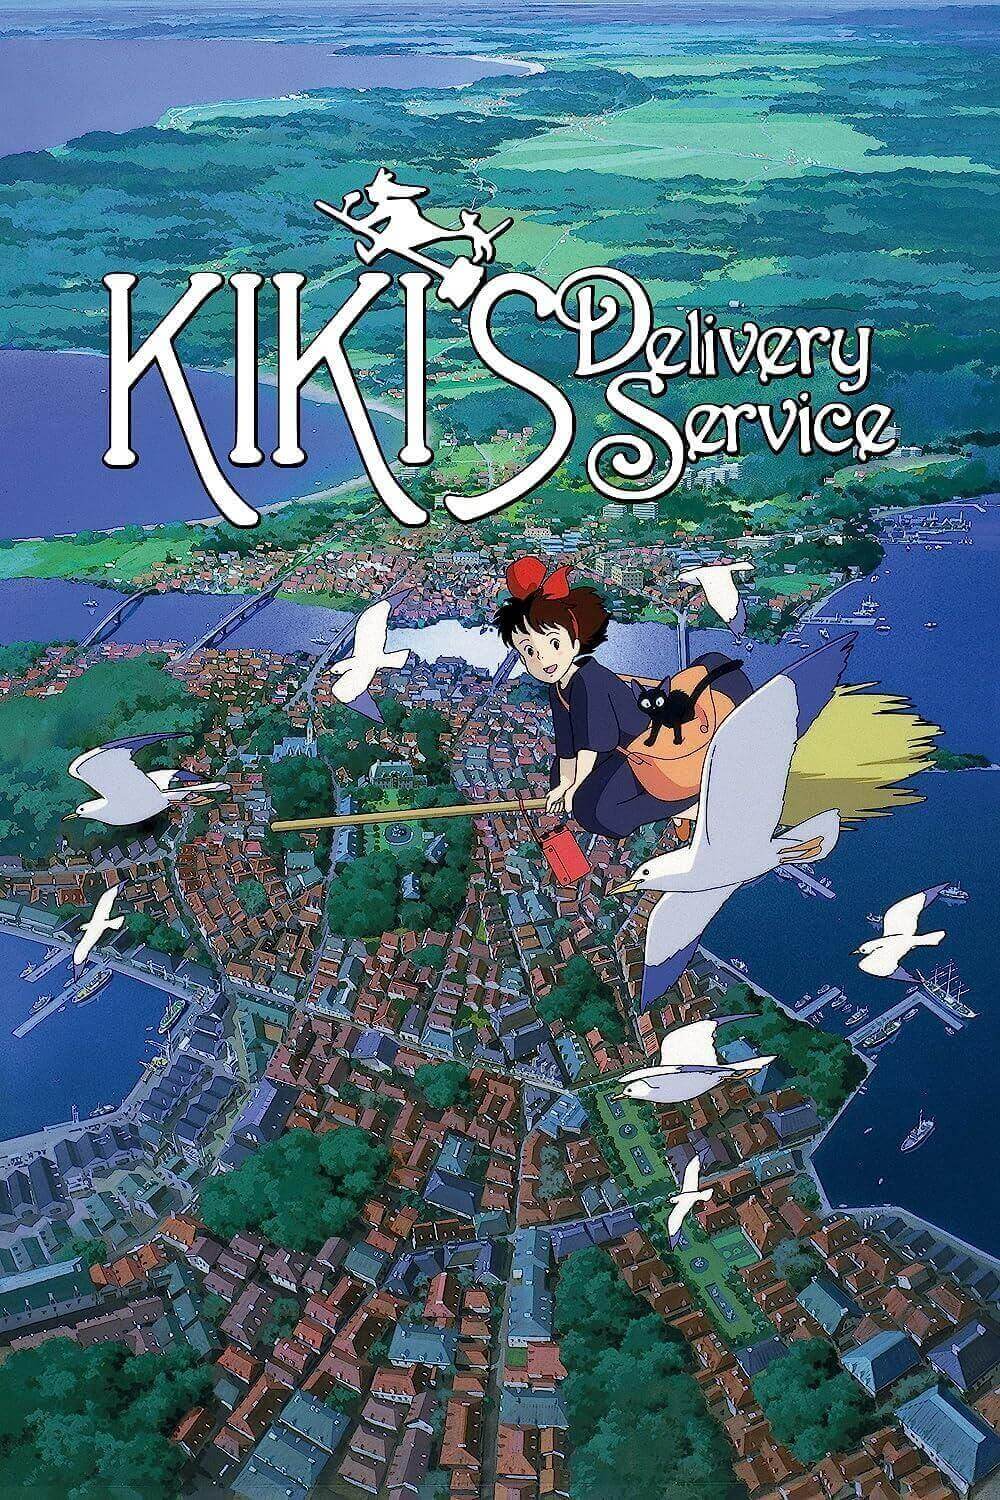 Watch Kiki's Delivery Service today, it's one of the best Studio Ghibli movies and best G-rated movies (5+ year olds).